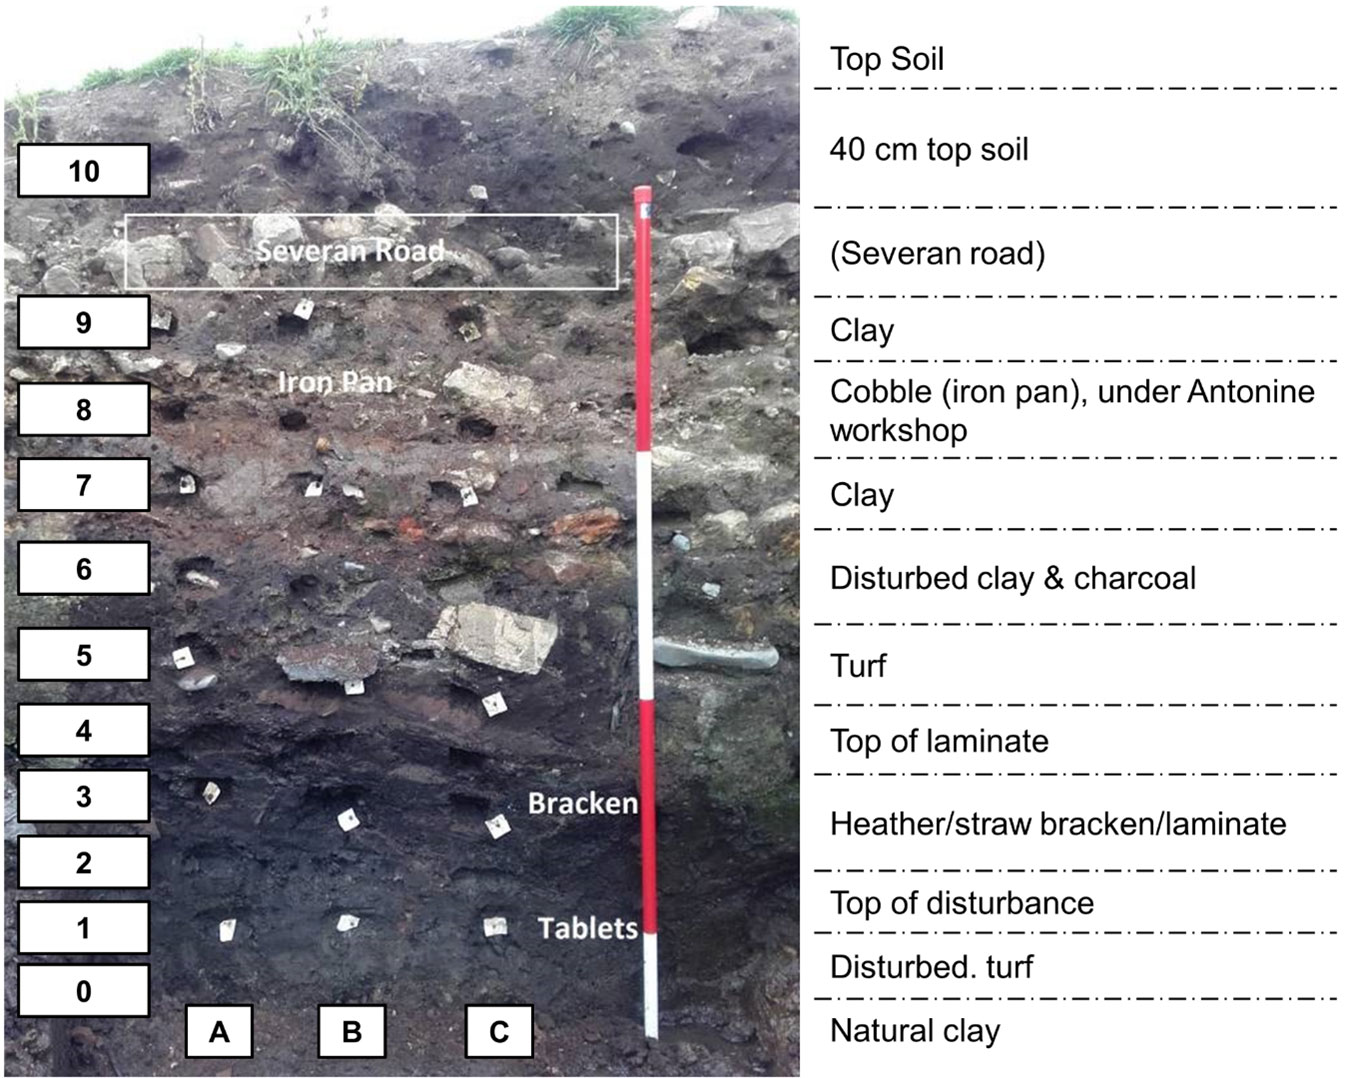 Solved 18. The figure shows the layers of soil in a tube